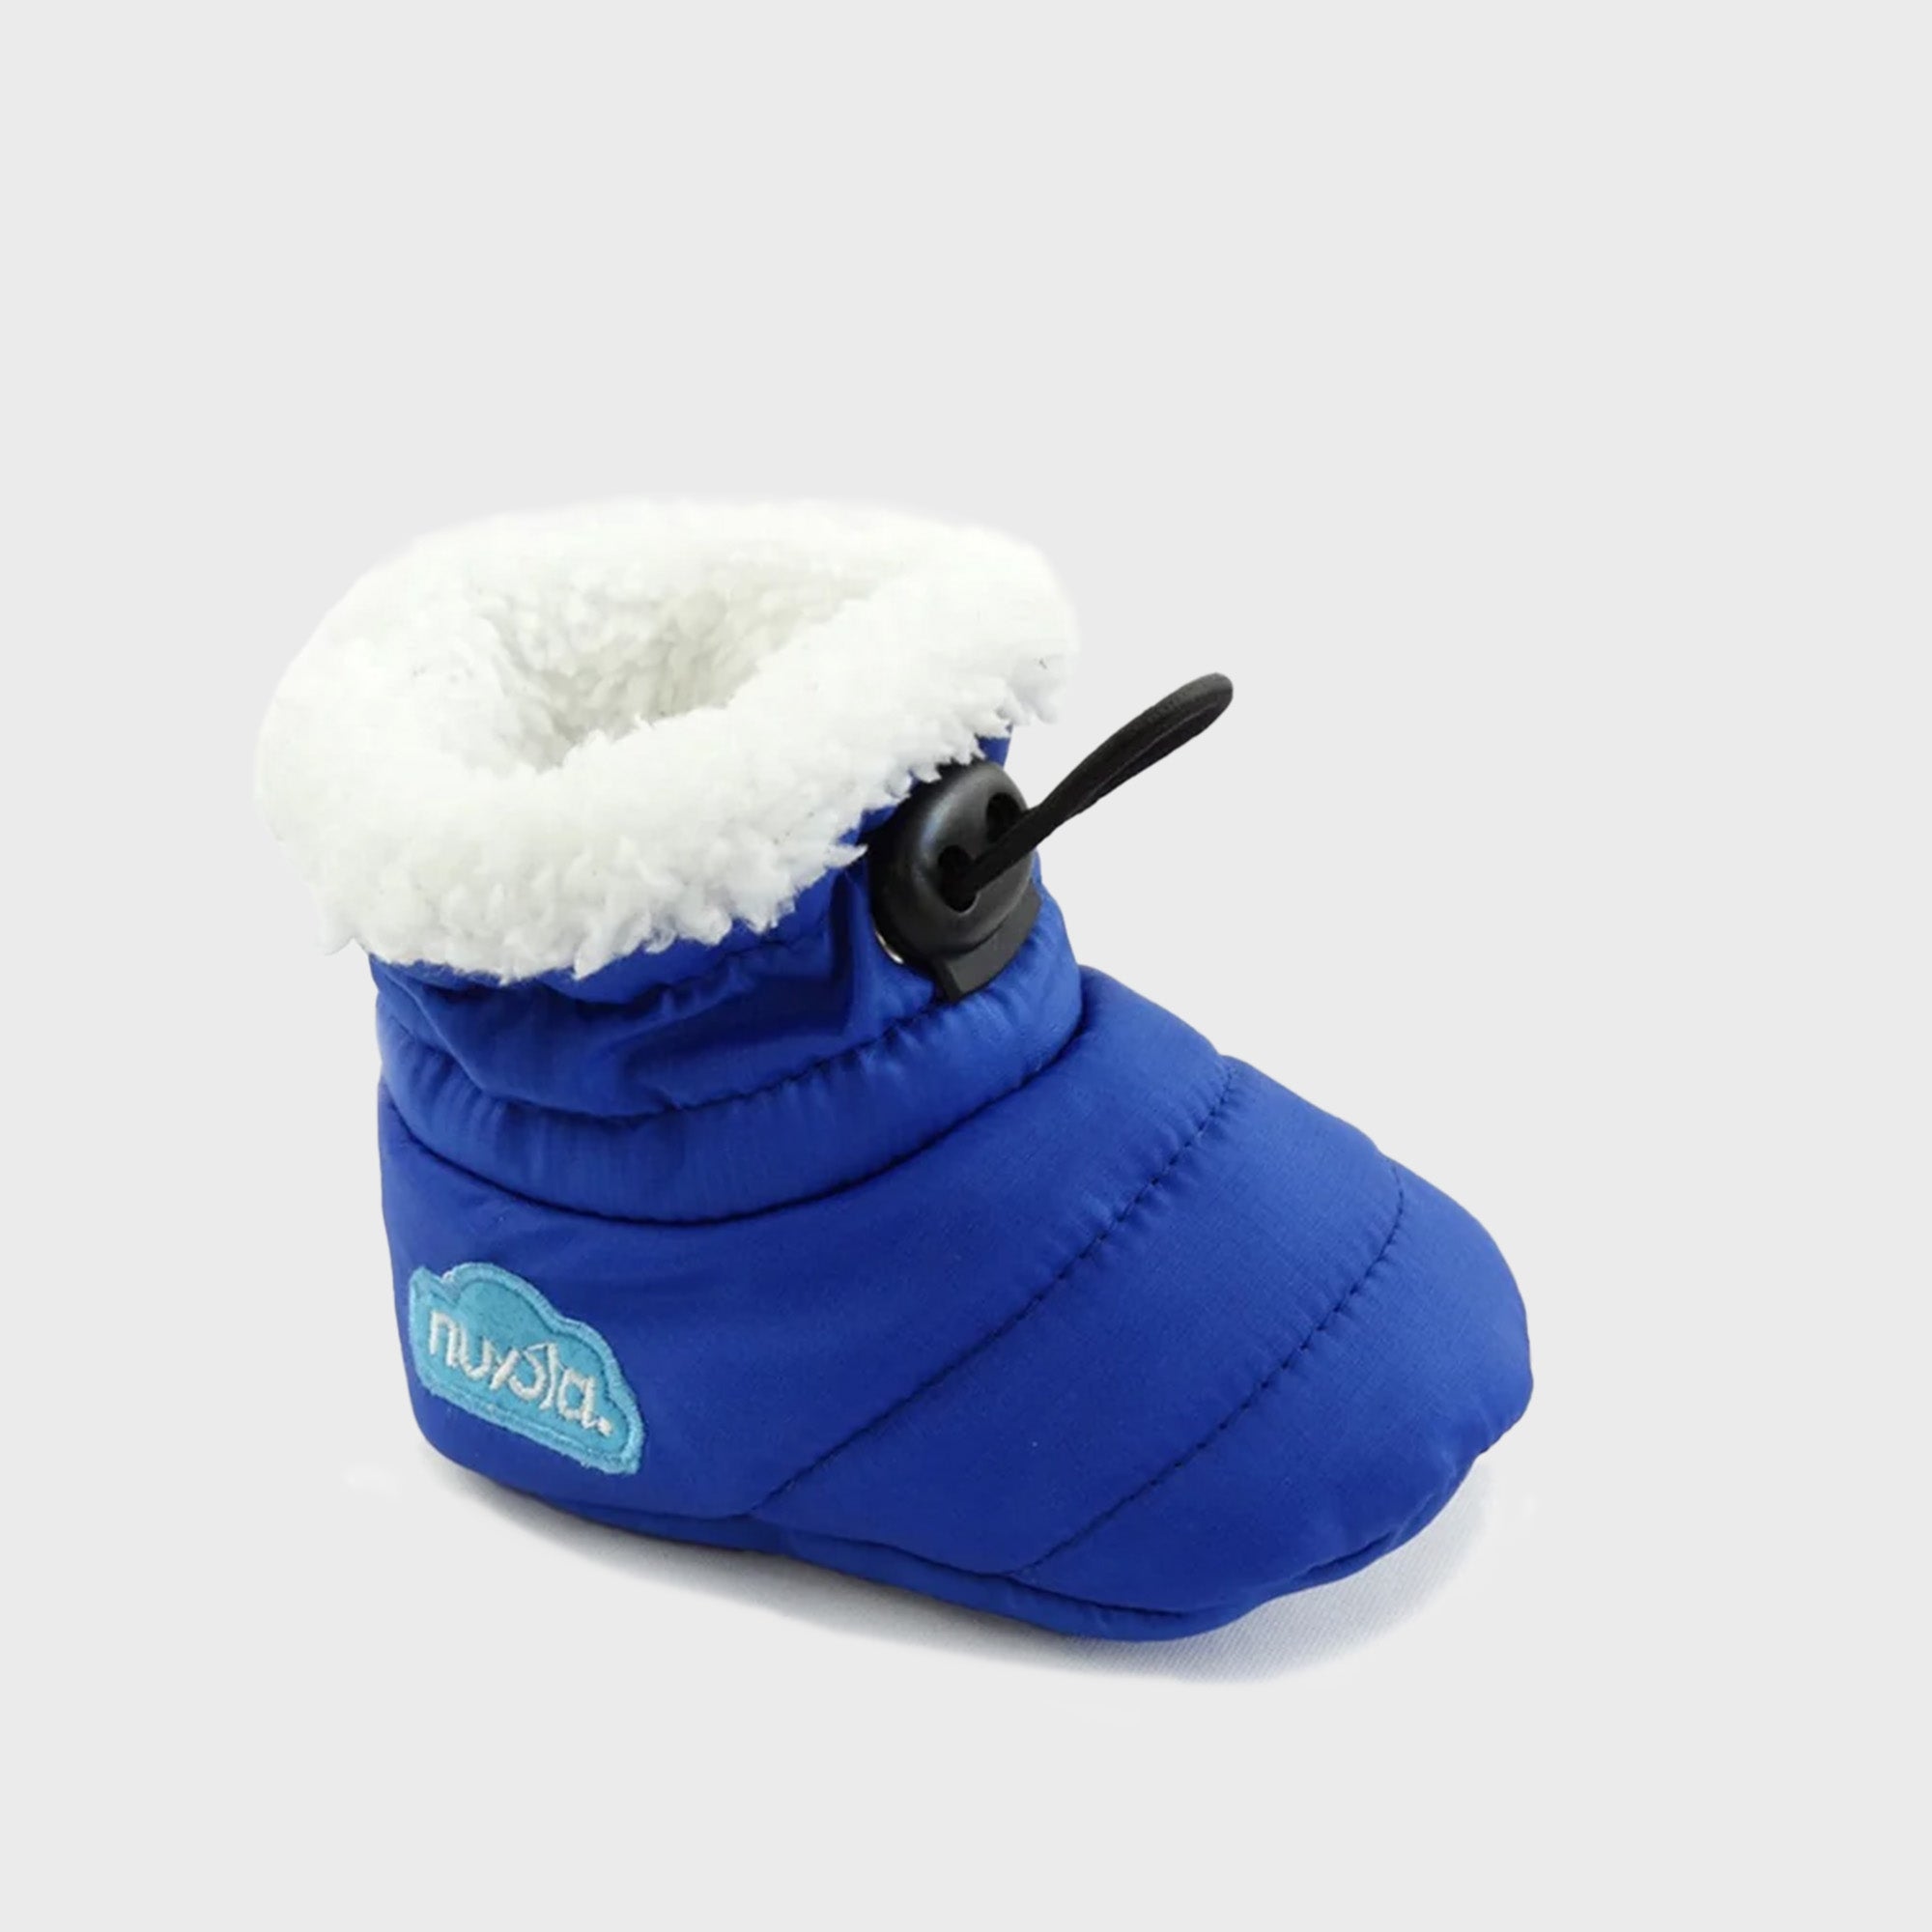 Nuvola Classic Baby Slippers in Blue CNBBYCL669 FROM EIGHTYWINGOLD - OFFICIAL BRAND PARTNER